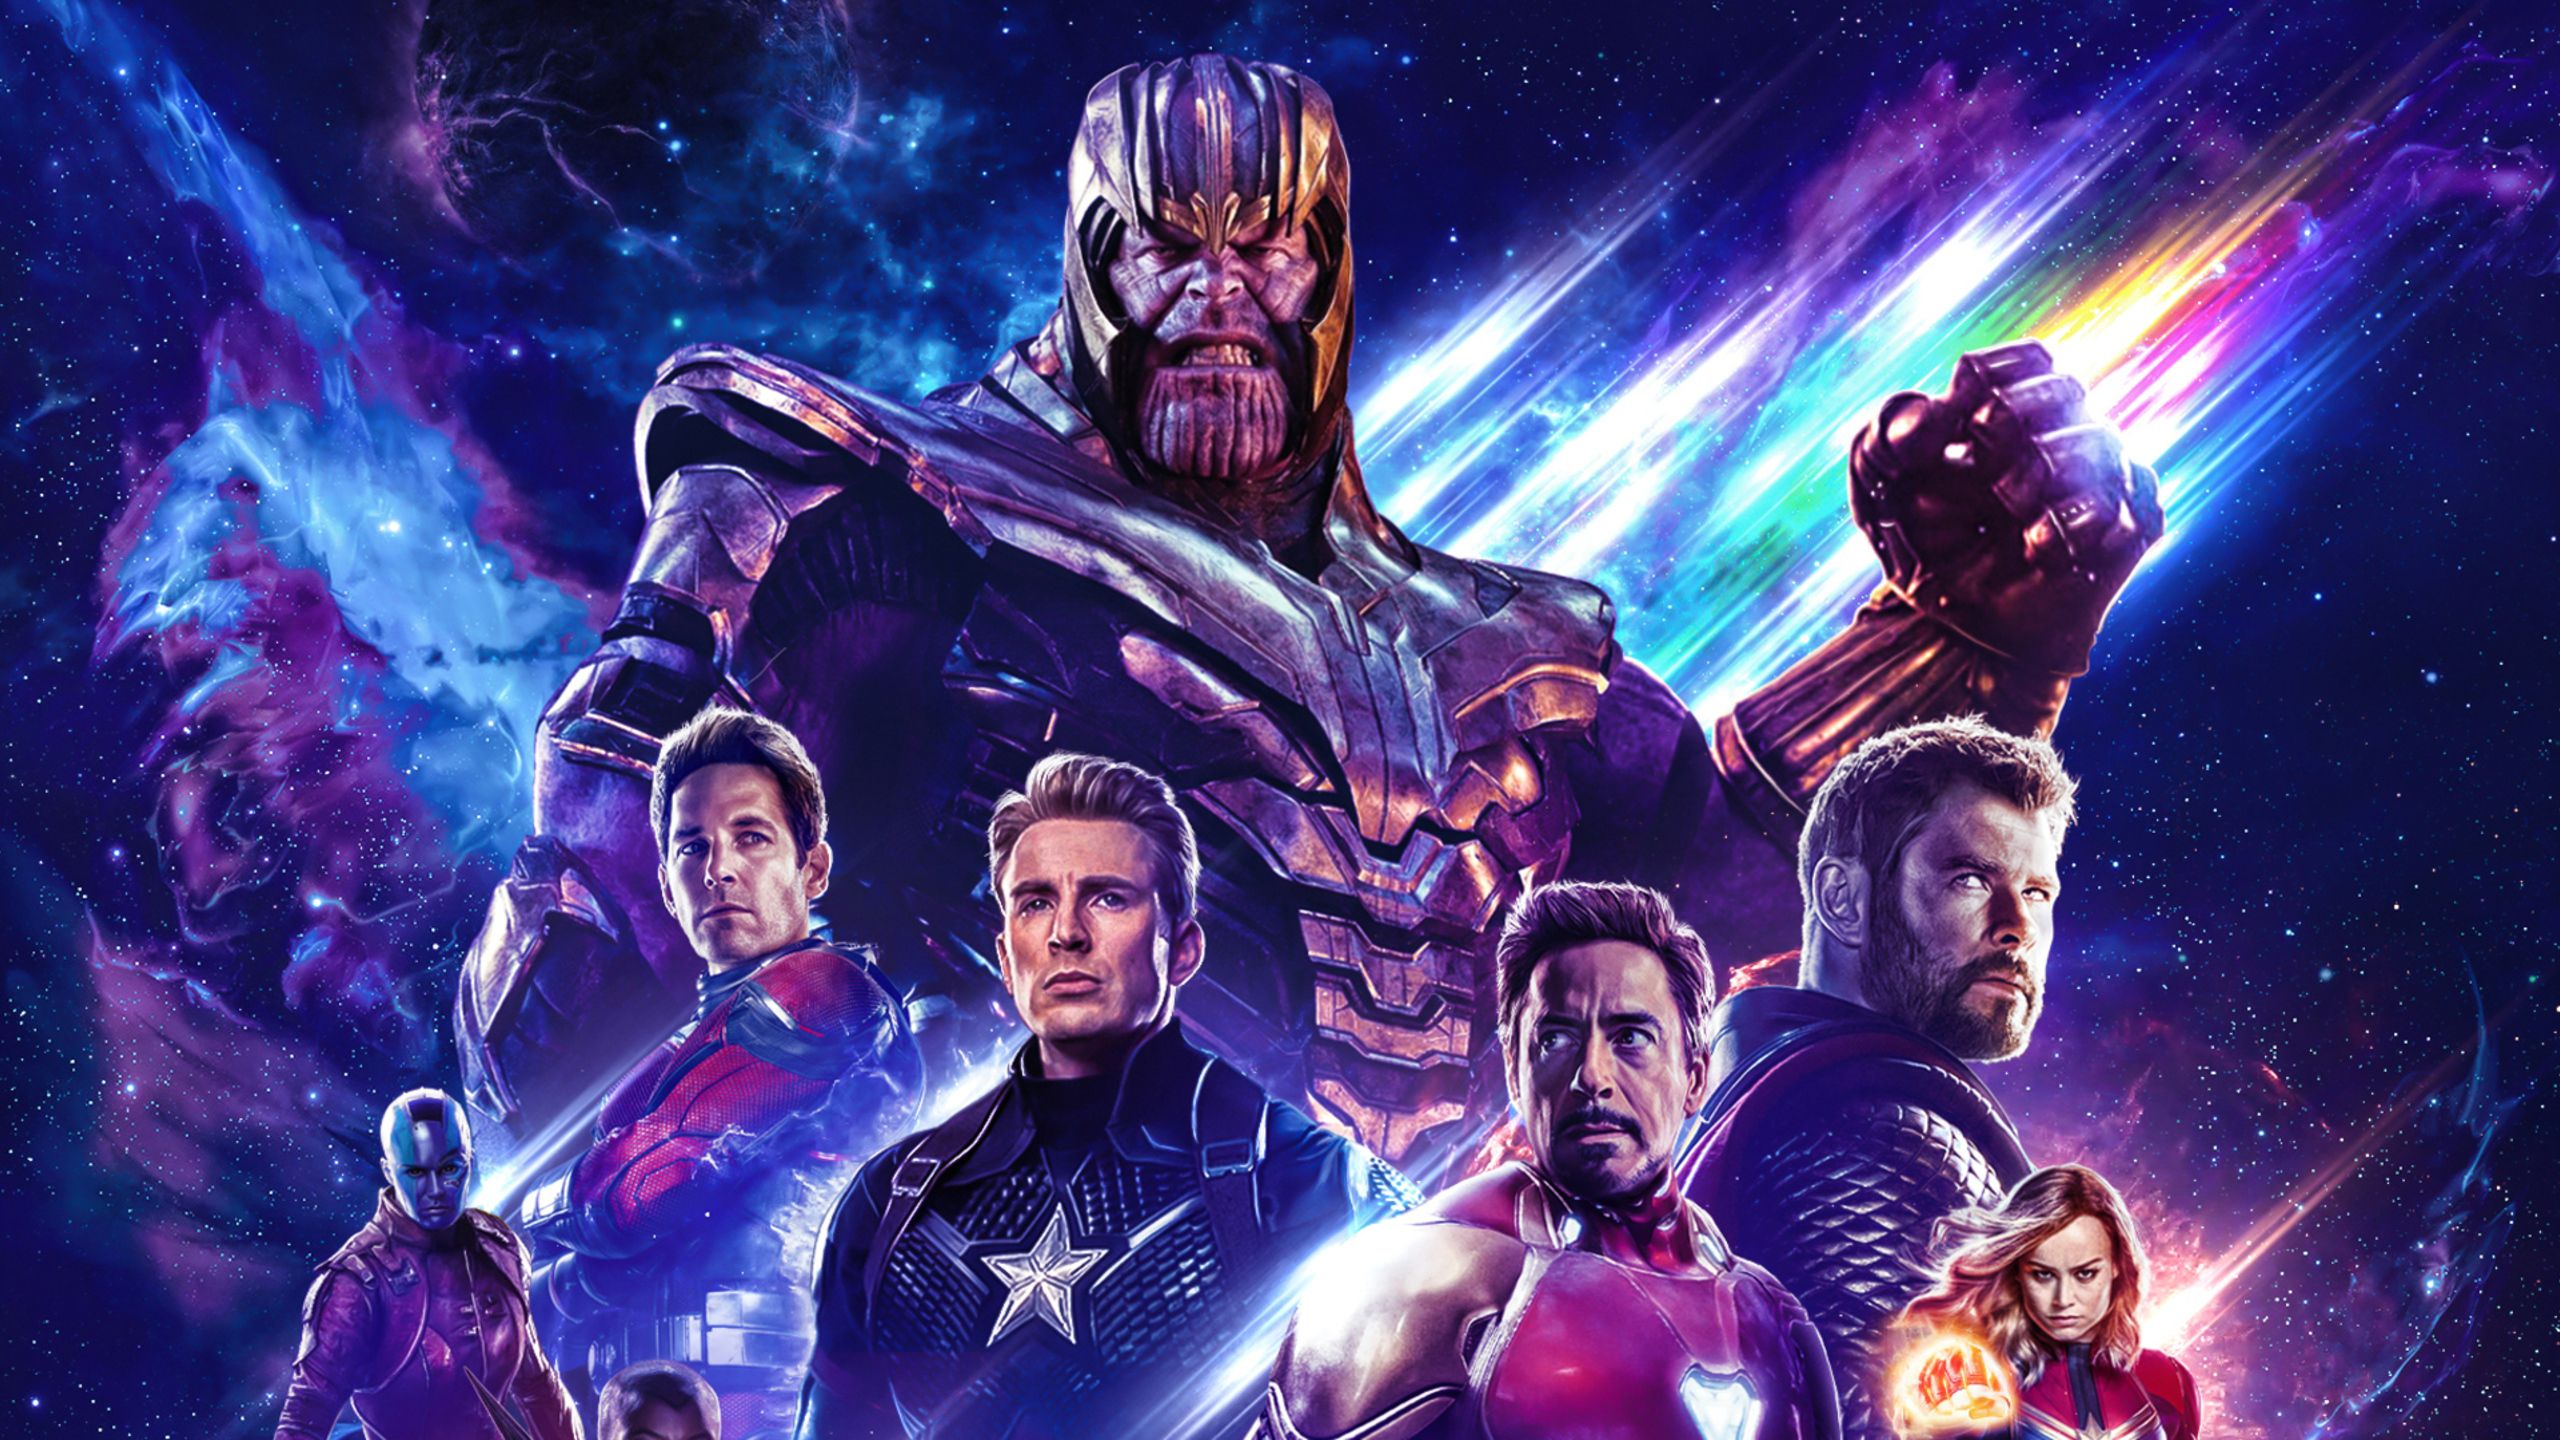 2560x1440 Poster Avengers Endgame 1440P Resolution HD 4k Wallpapers, Image, Backgrounds, Photos and Pictures